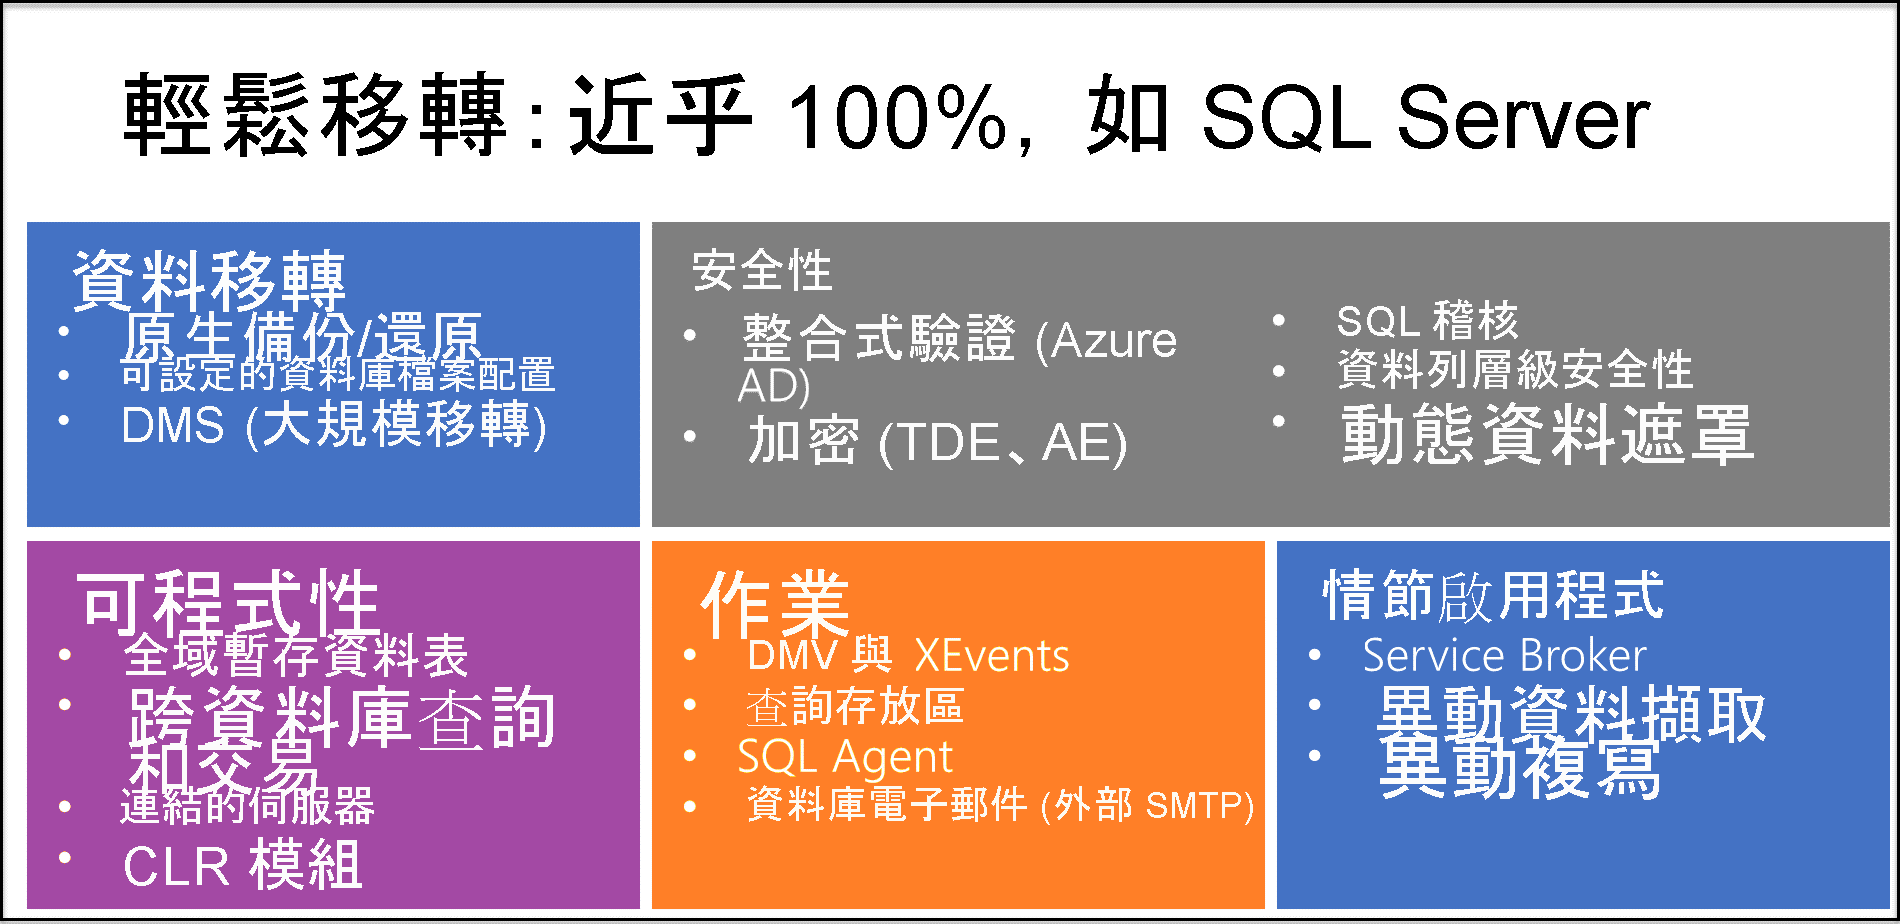 Diagram explaining some of the most important features of Azure SQL Managed Instance.